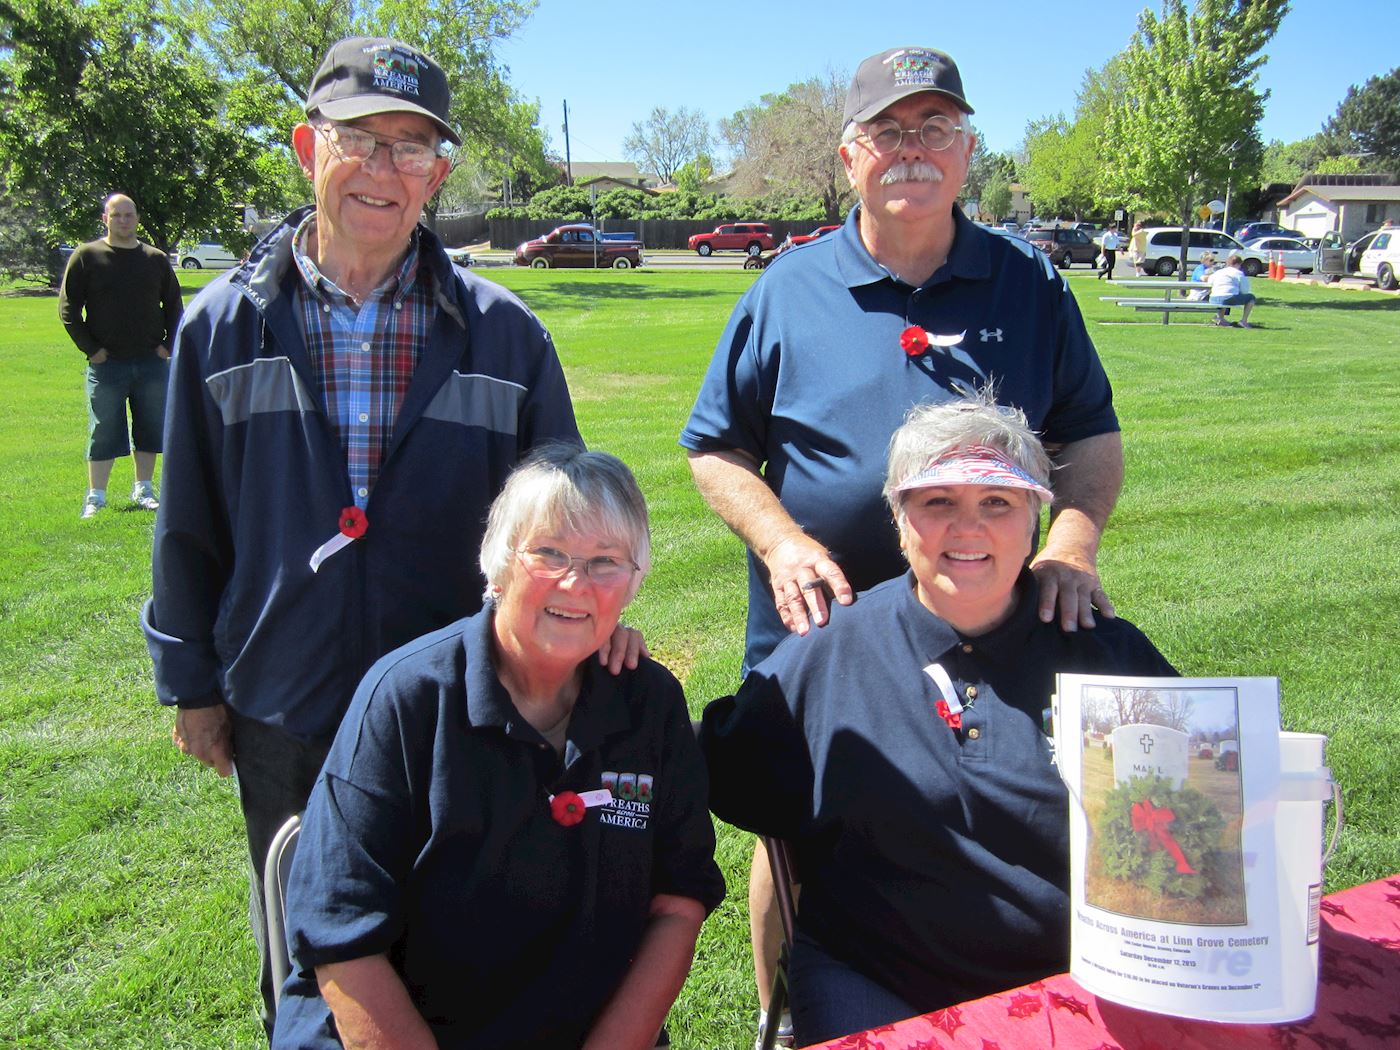 Mike and Linda Peters and Bill and Chris Ruth - 2015 Armed Forces Day, Greeley, Colorado